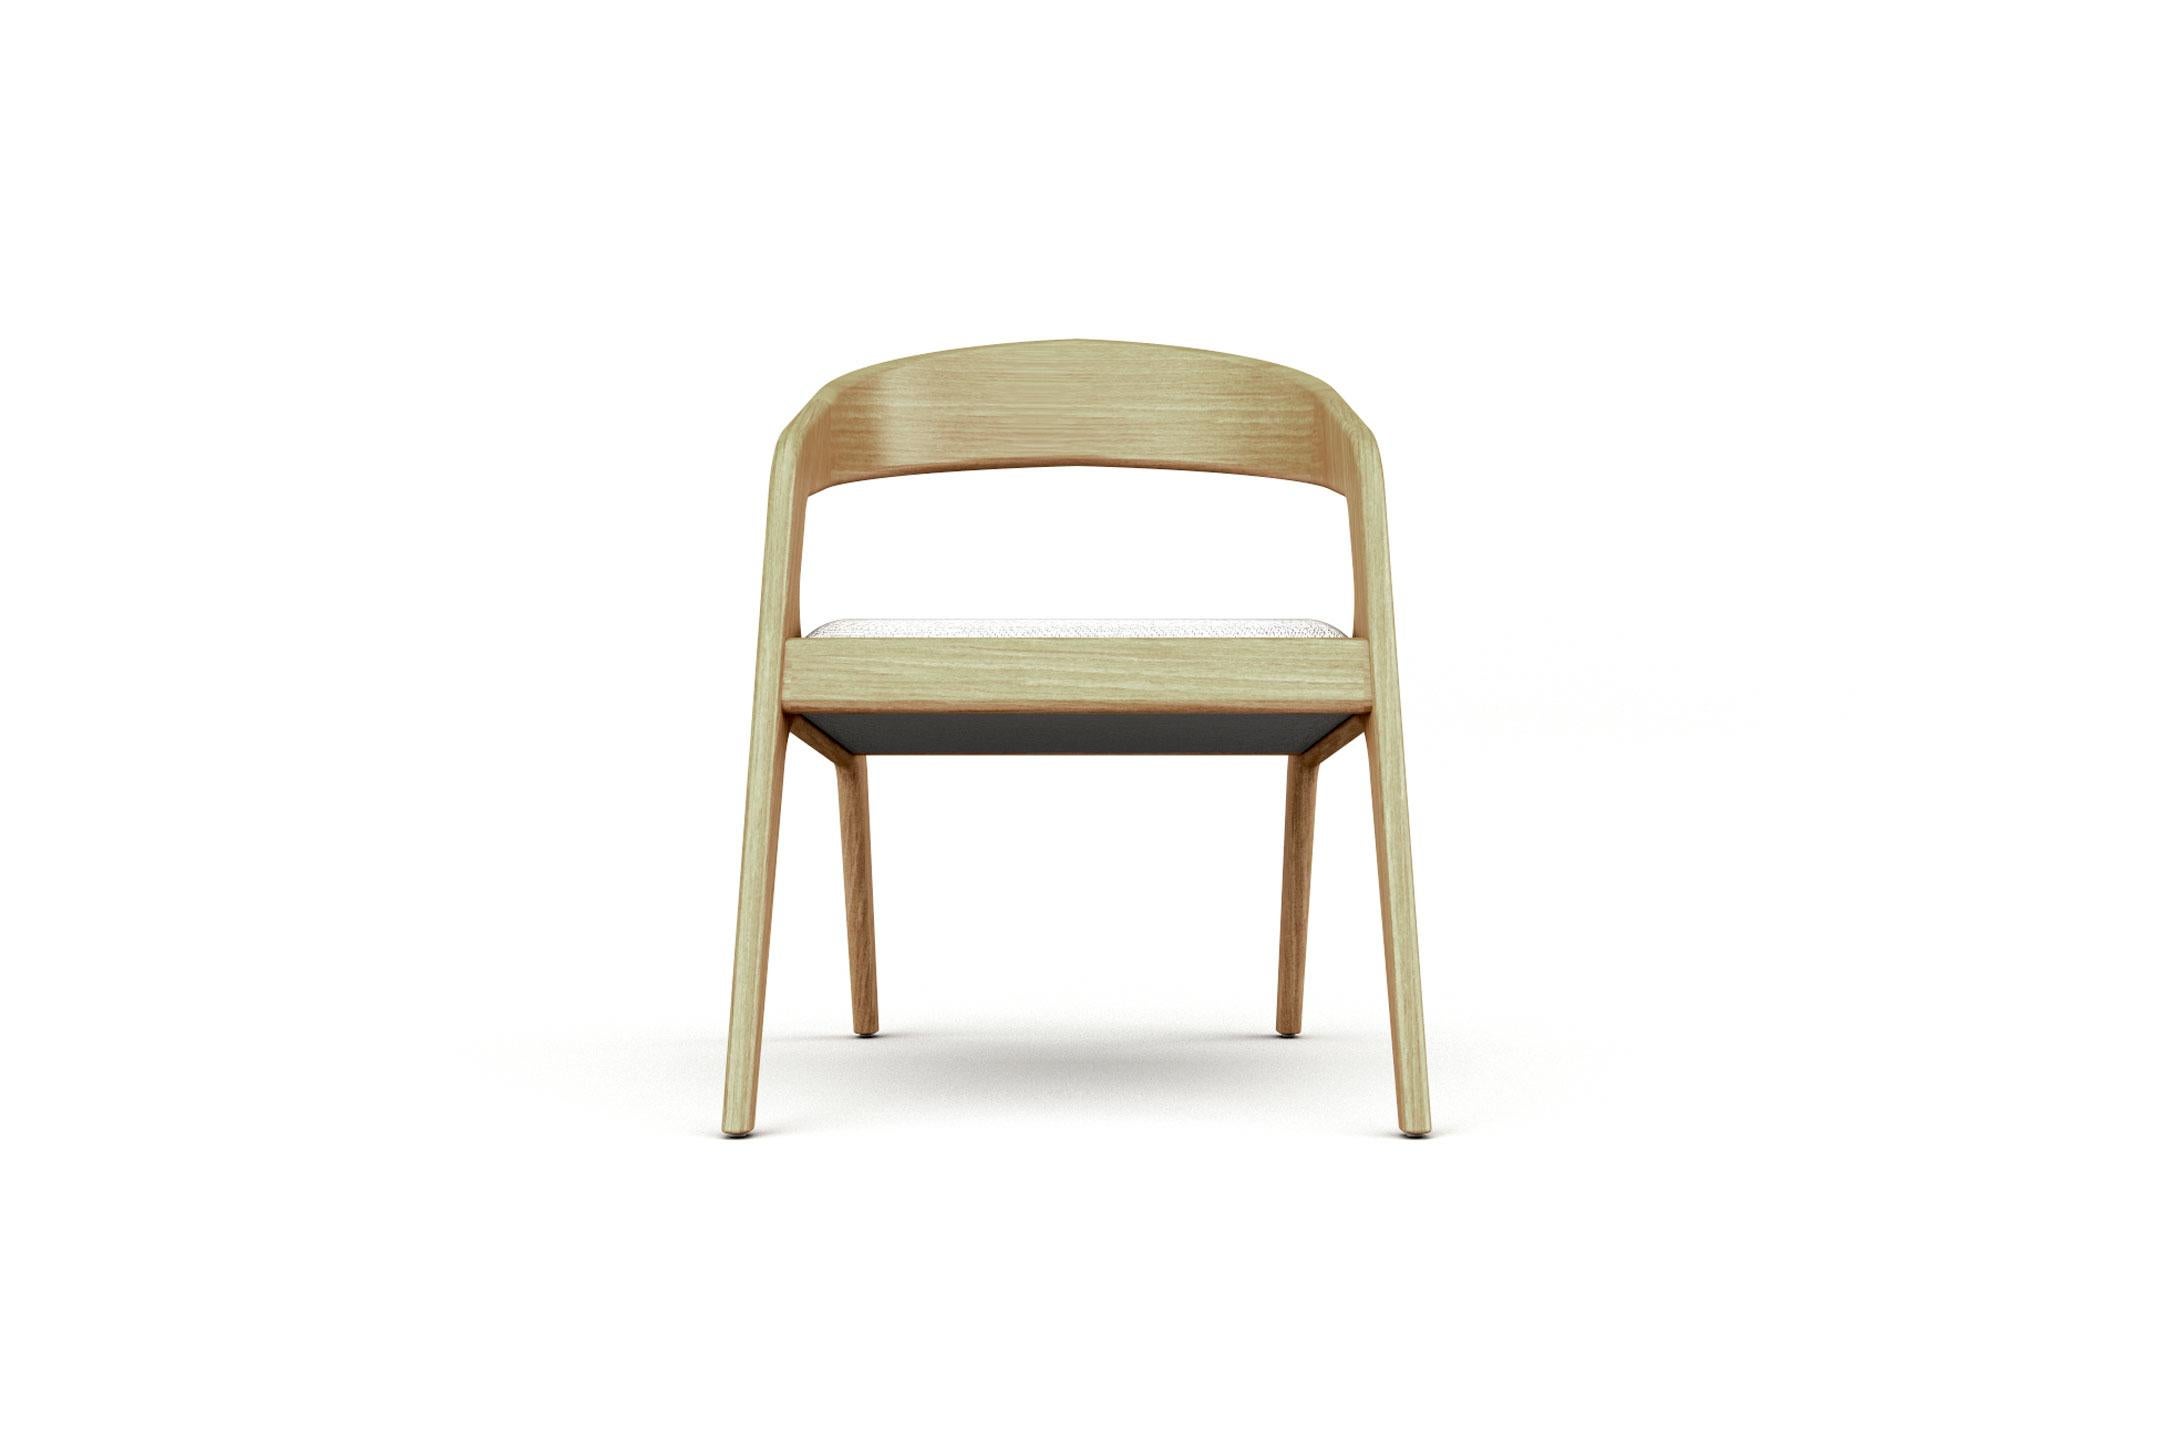 European Aura Armchair - Modern and minimalistic oak armchair with upholstered seat For Sale